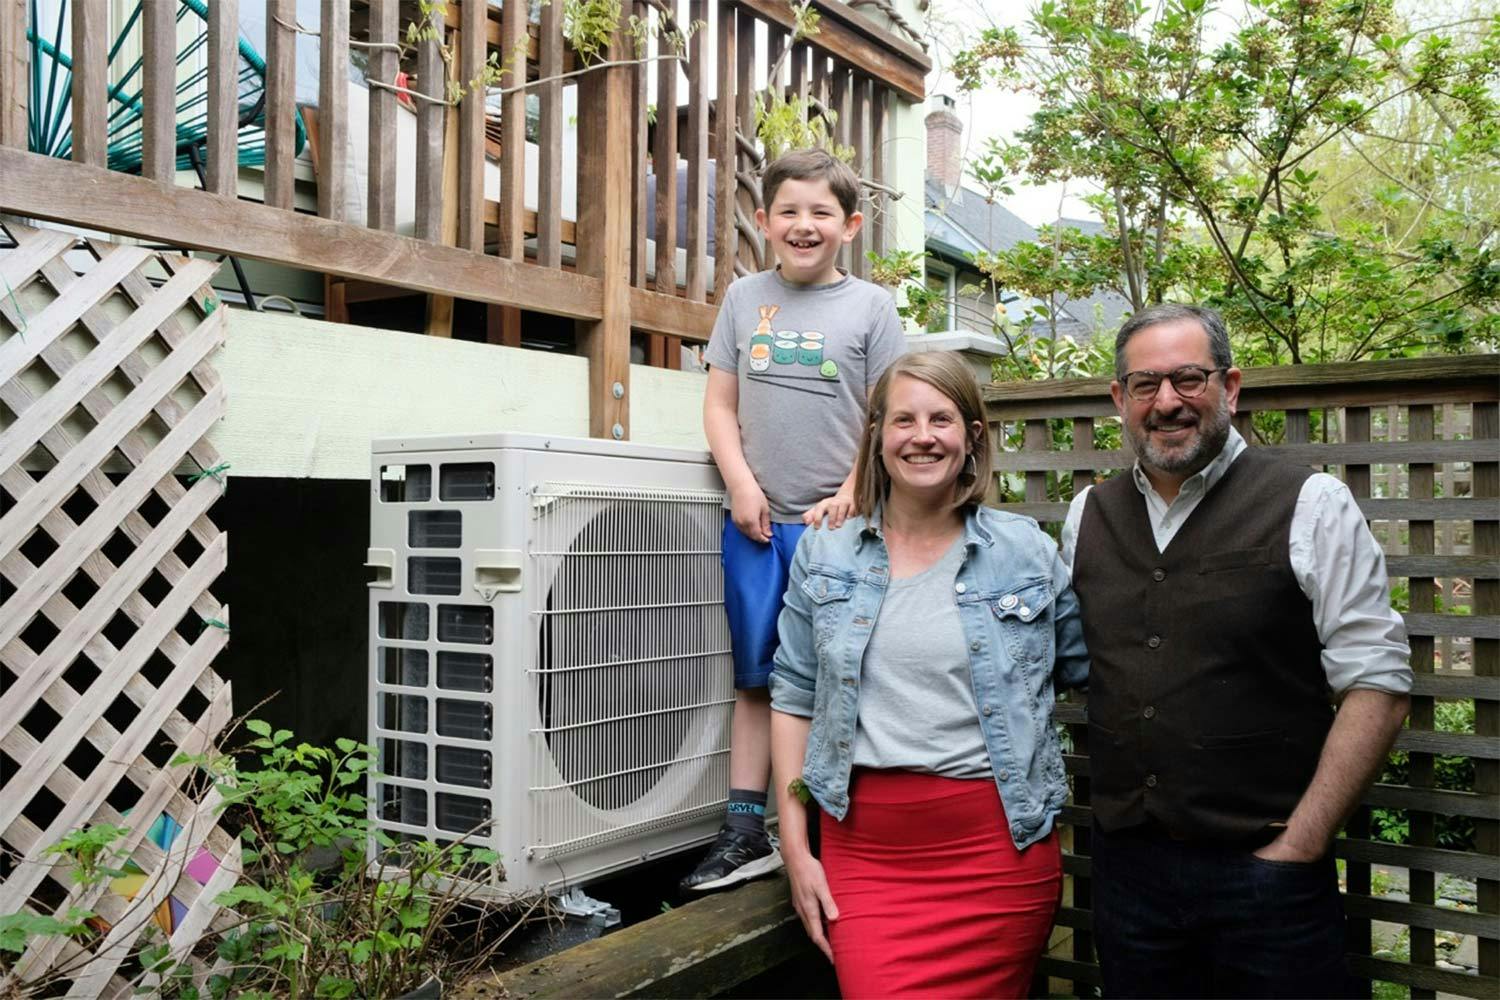 From R to L: Seth Klein, Christine Boyle and their son Aaron stand beside their heat pump in ther backyard, under the porch.